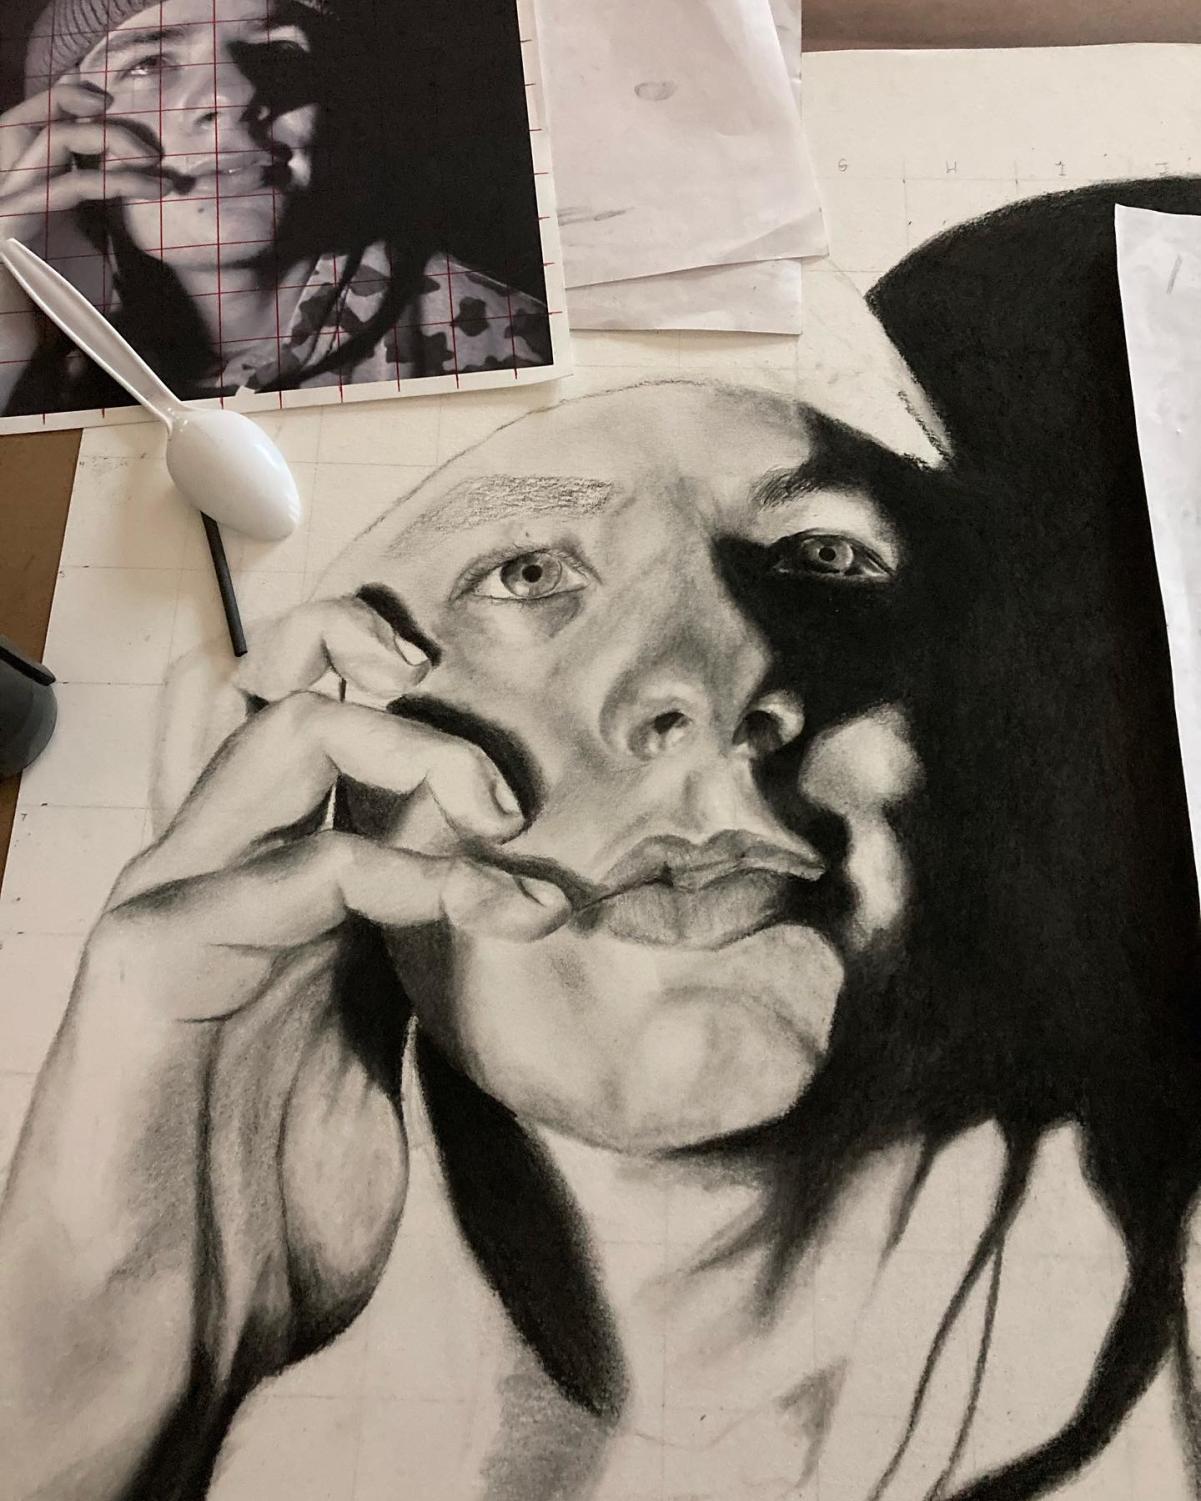 A black and white drawing shows an up close of a person's face with their hands on the side of their face. 